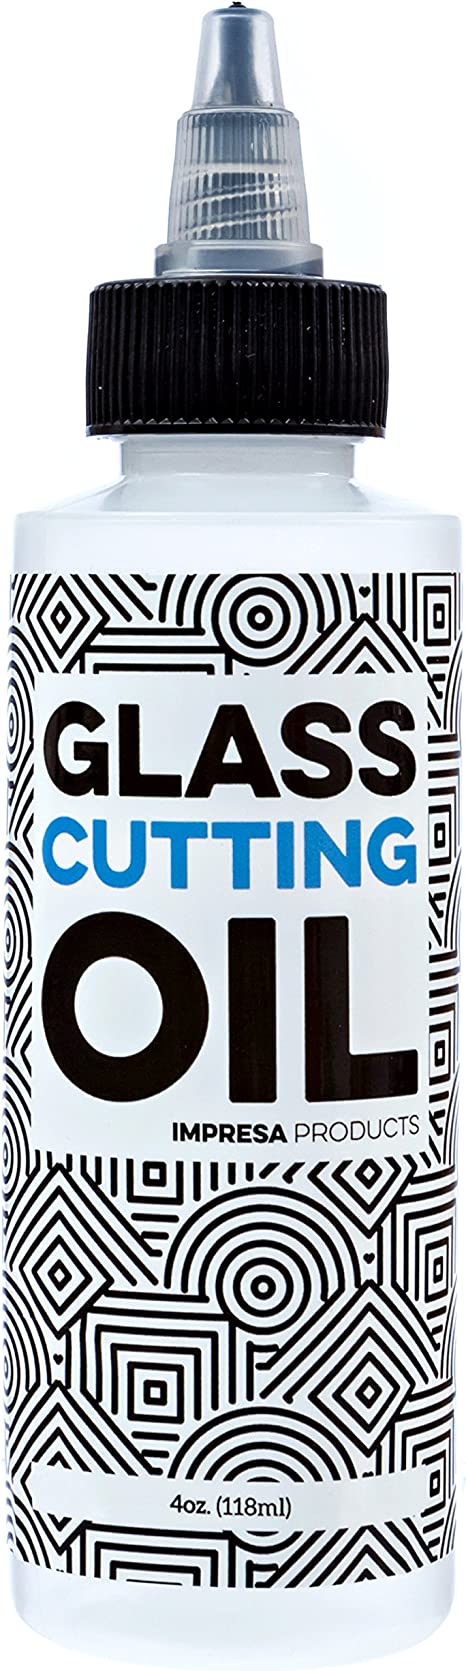 Premium Glass Cutting Oil with Precision Application Top - 4 Ounces - Custom-Formulated for an Array of Glass Cutters and Glass Cutting Applications Including Bottles! by Impresa Products